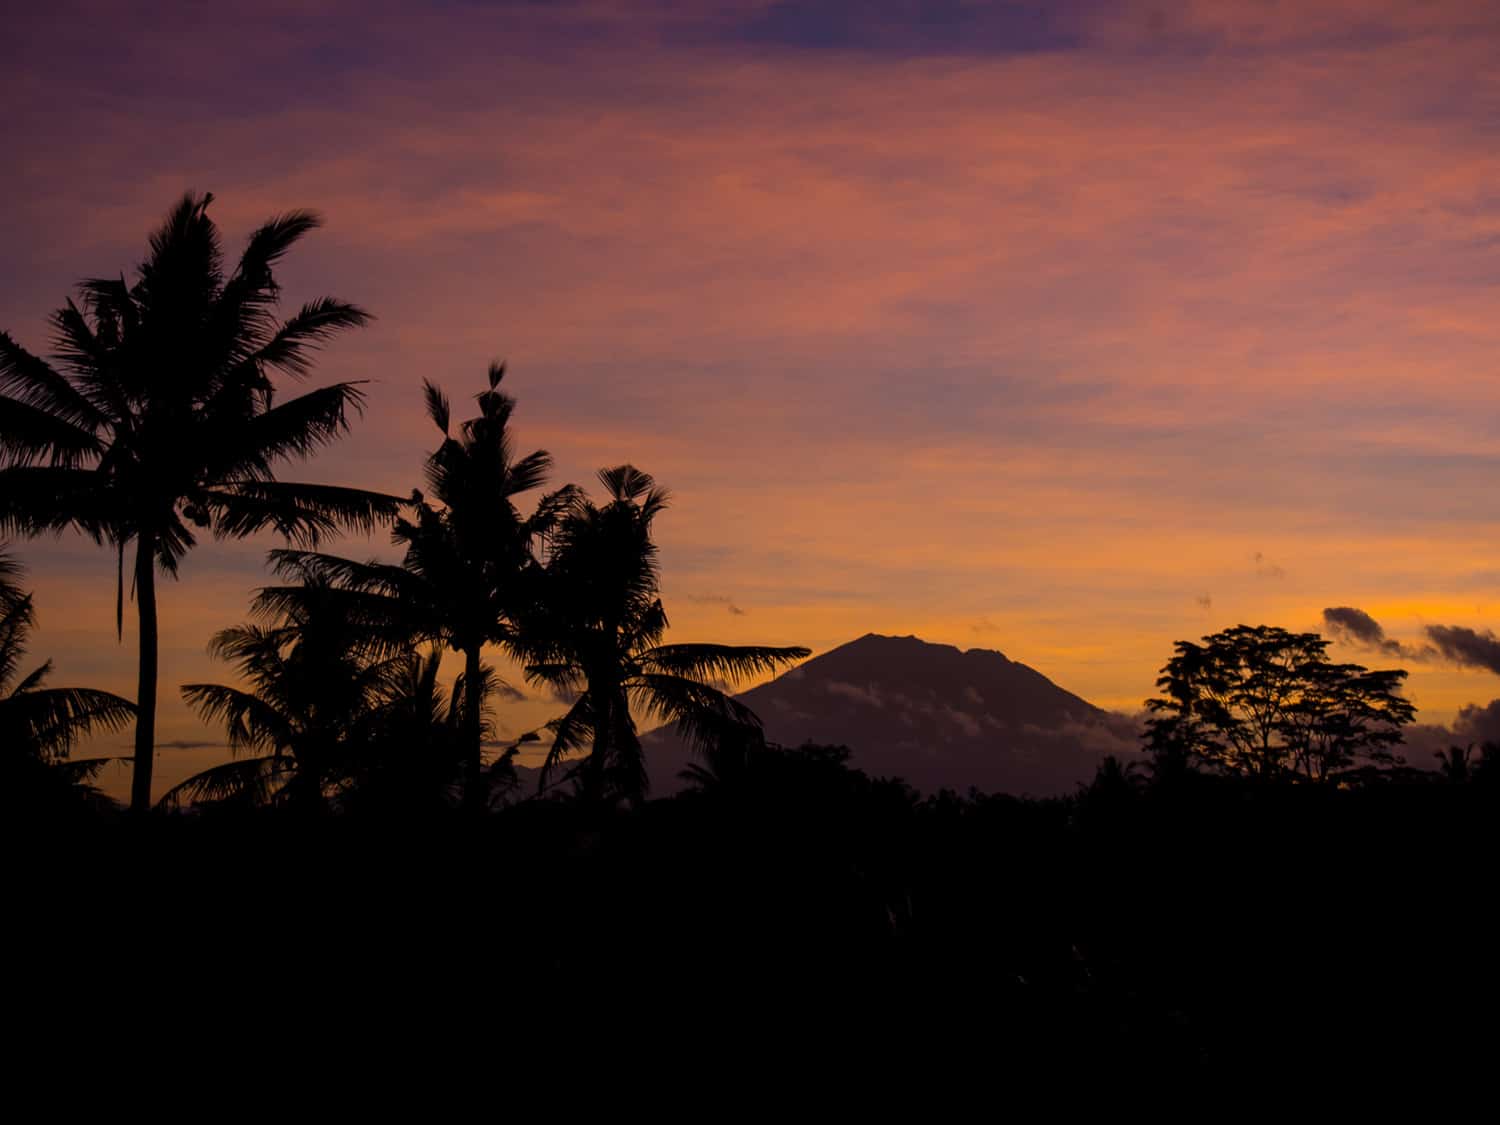 Getting an Indonesia visa extension in Ubud - sunrise volcano view.